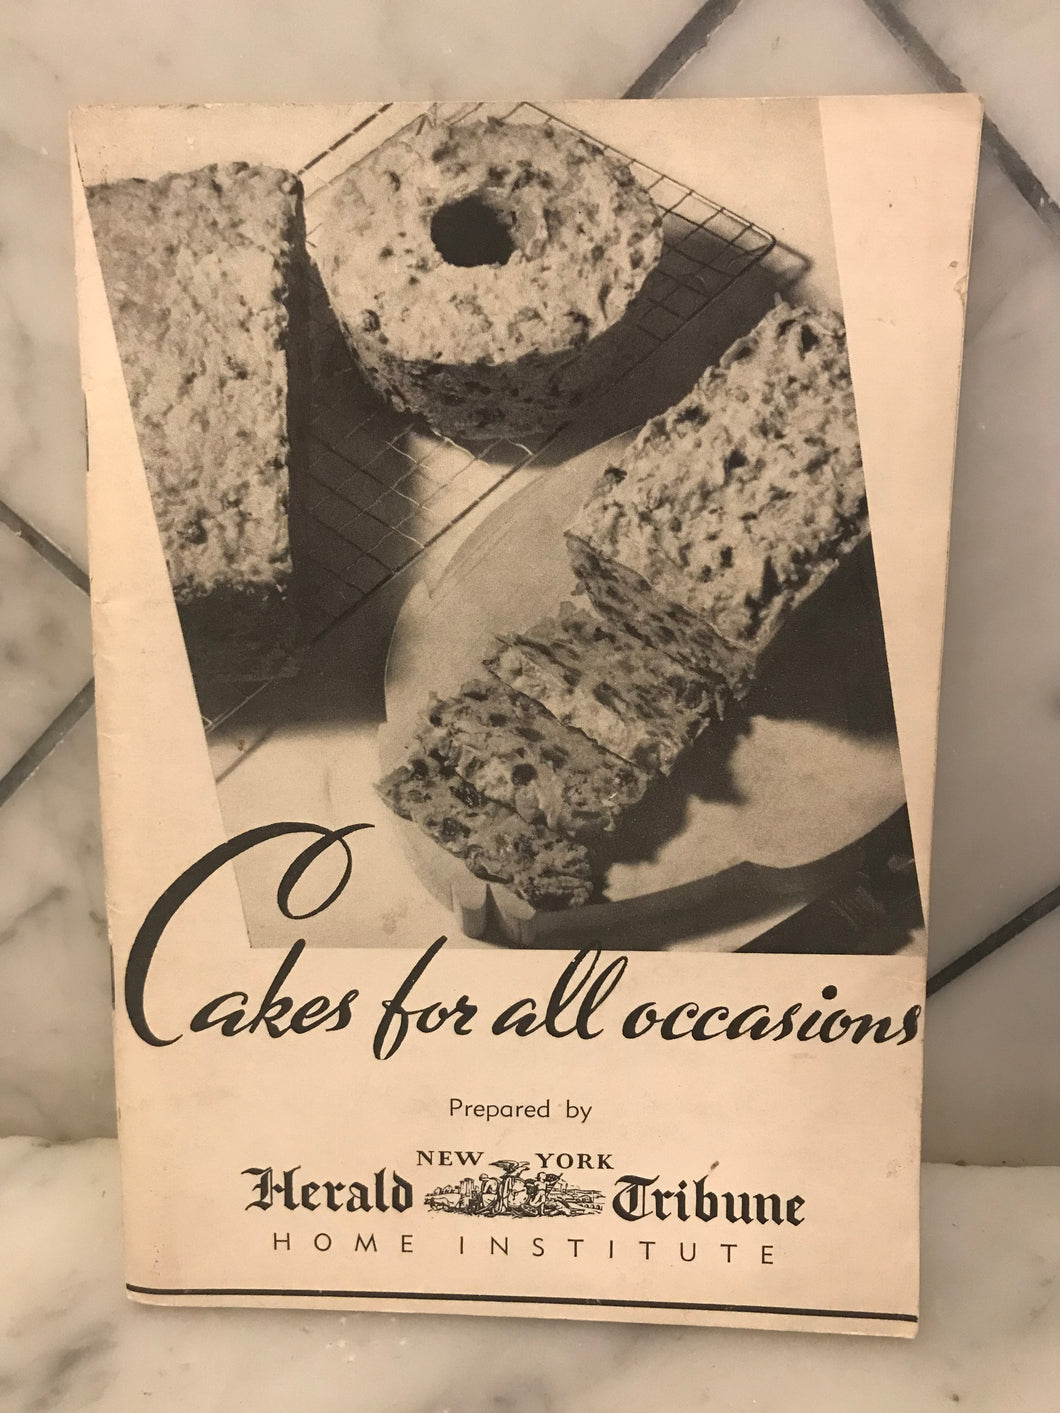 Cakes For All Occasions Prepared By New York Herald Tribune Home Institute